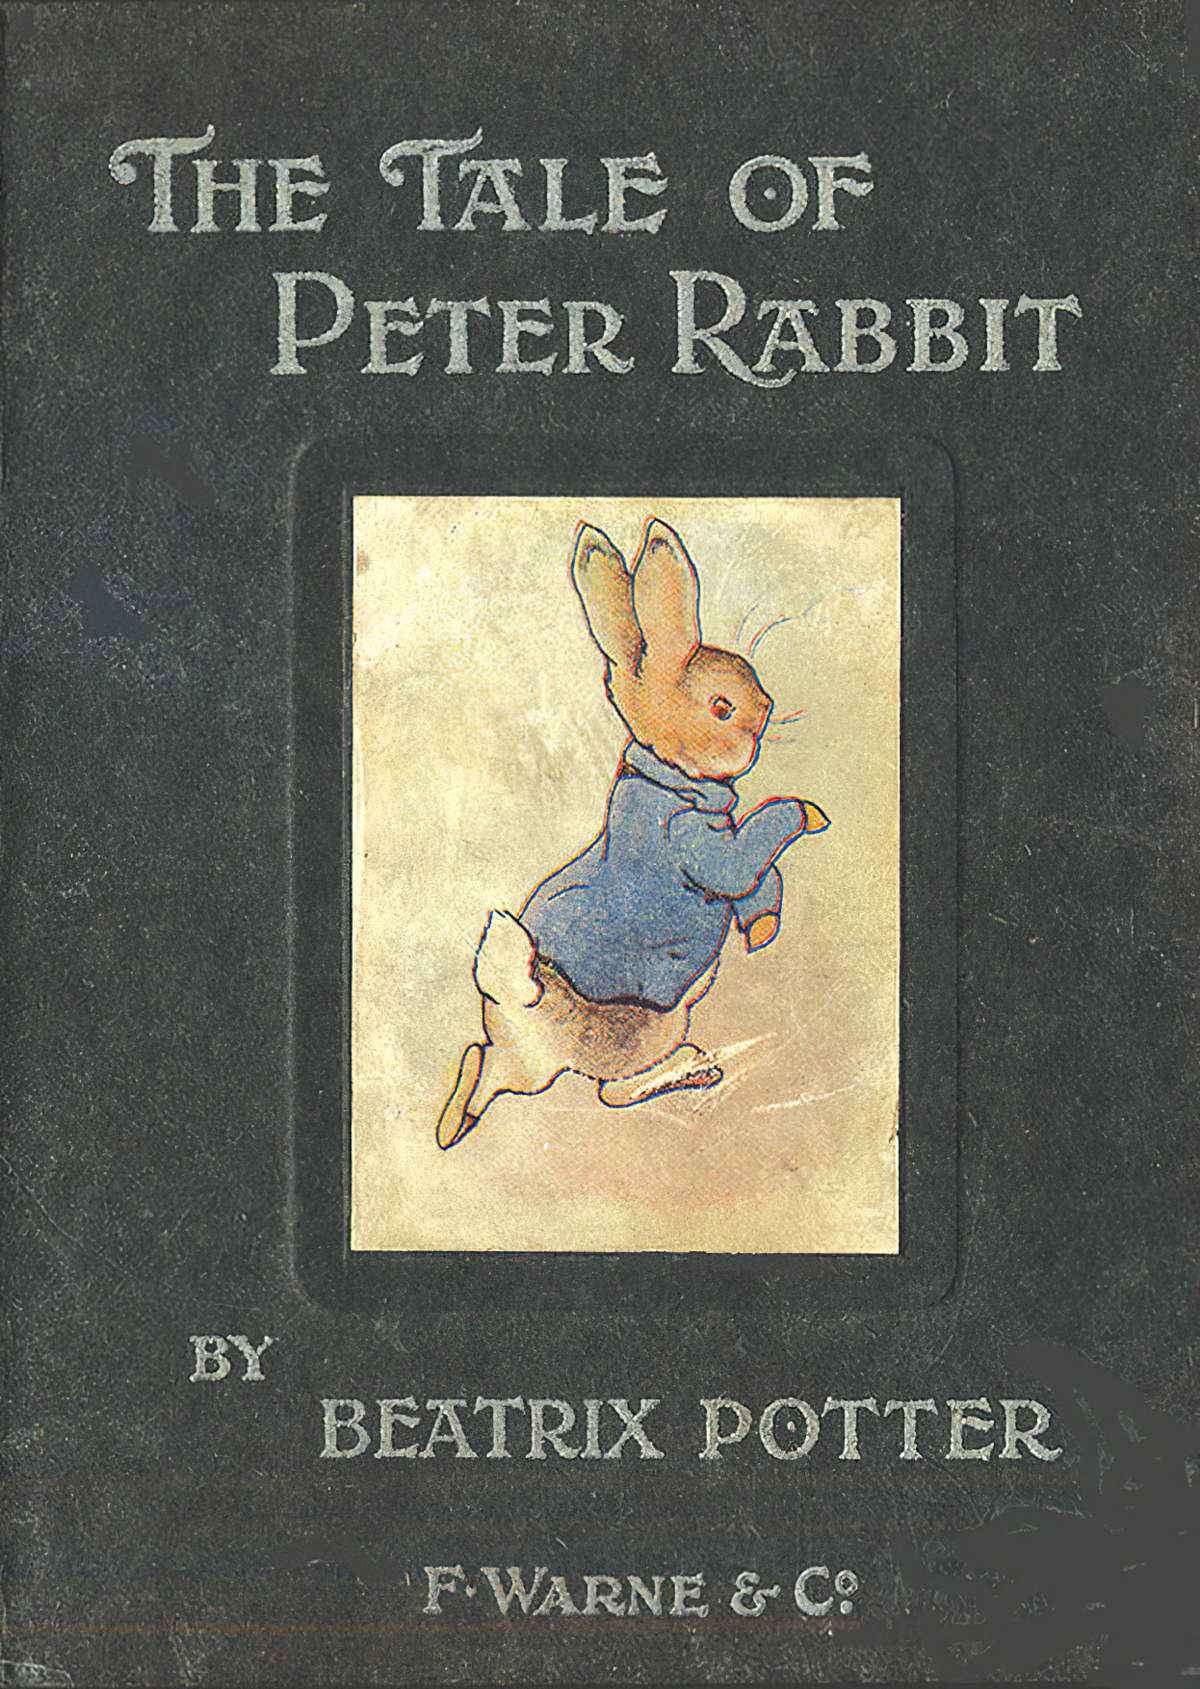 The Tale Of Peter Rabbit by Beatrix Potter Analysis